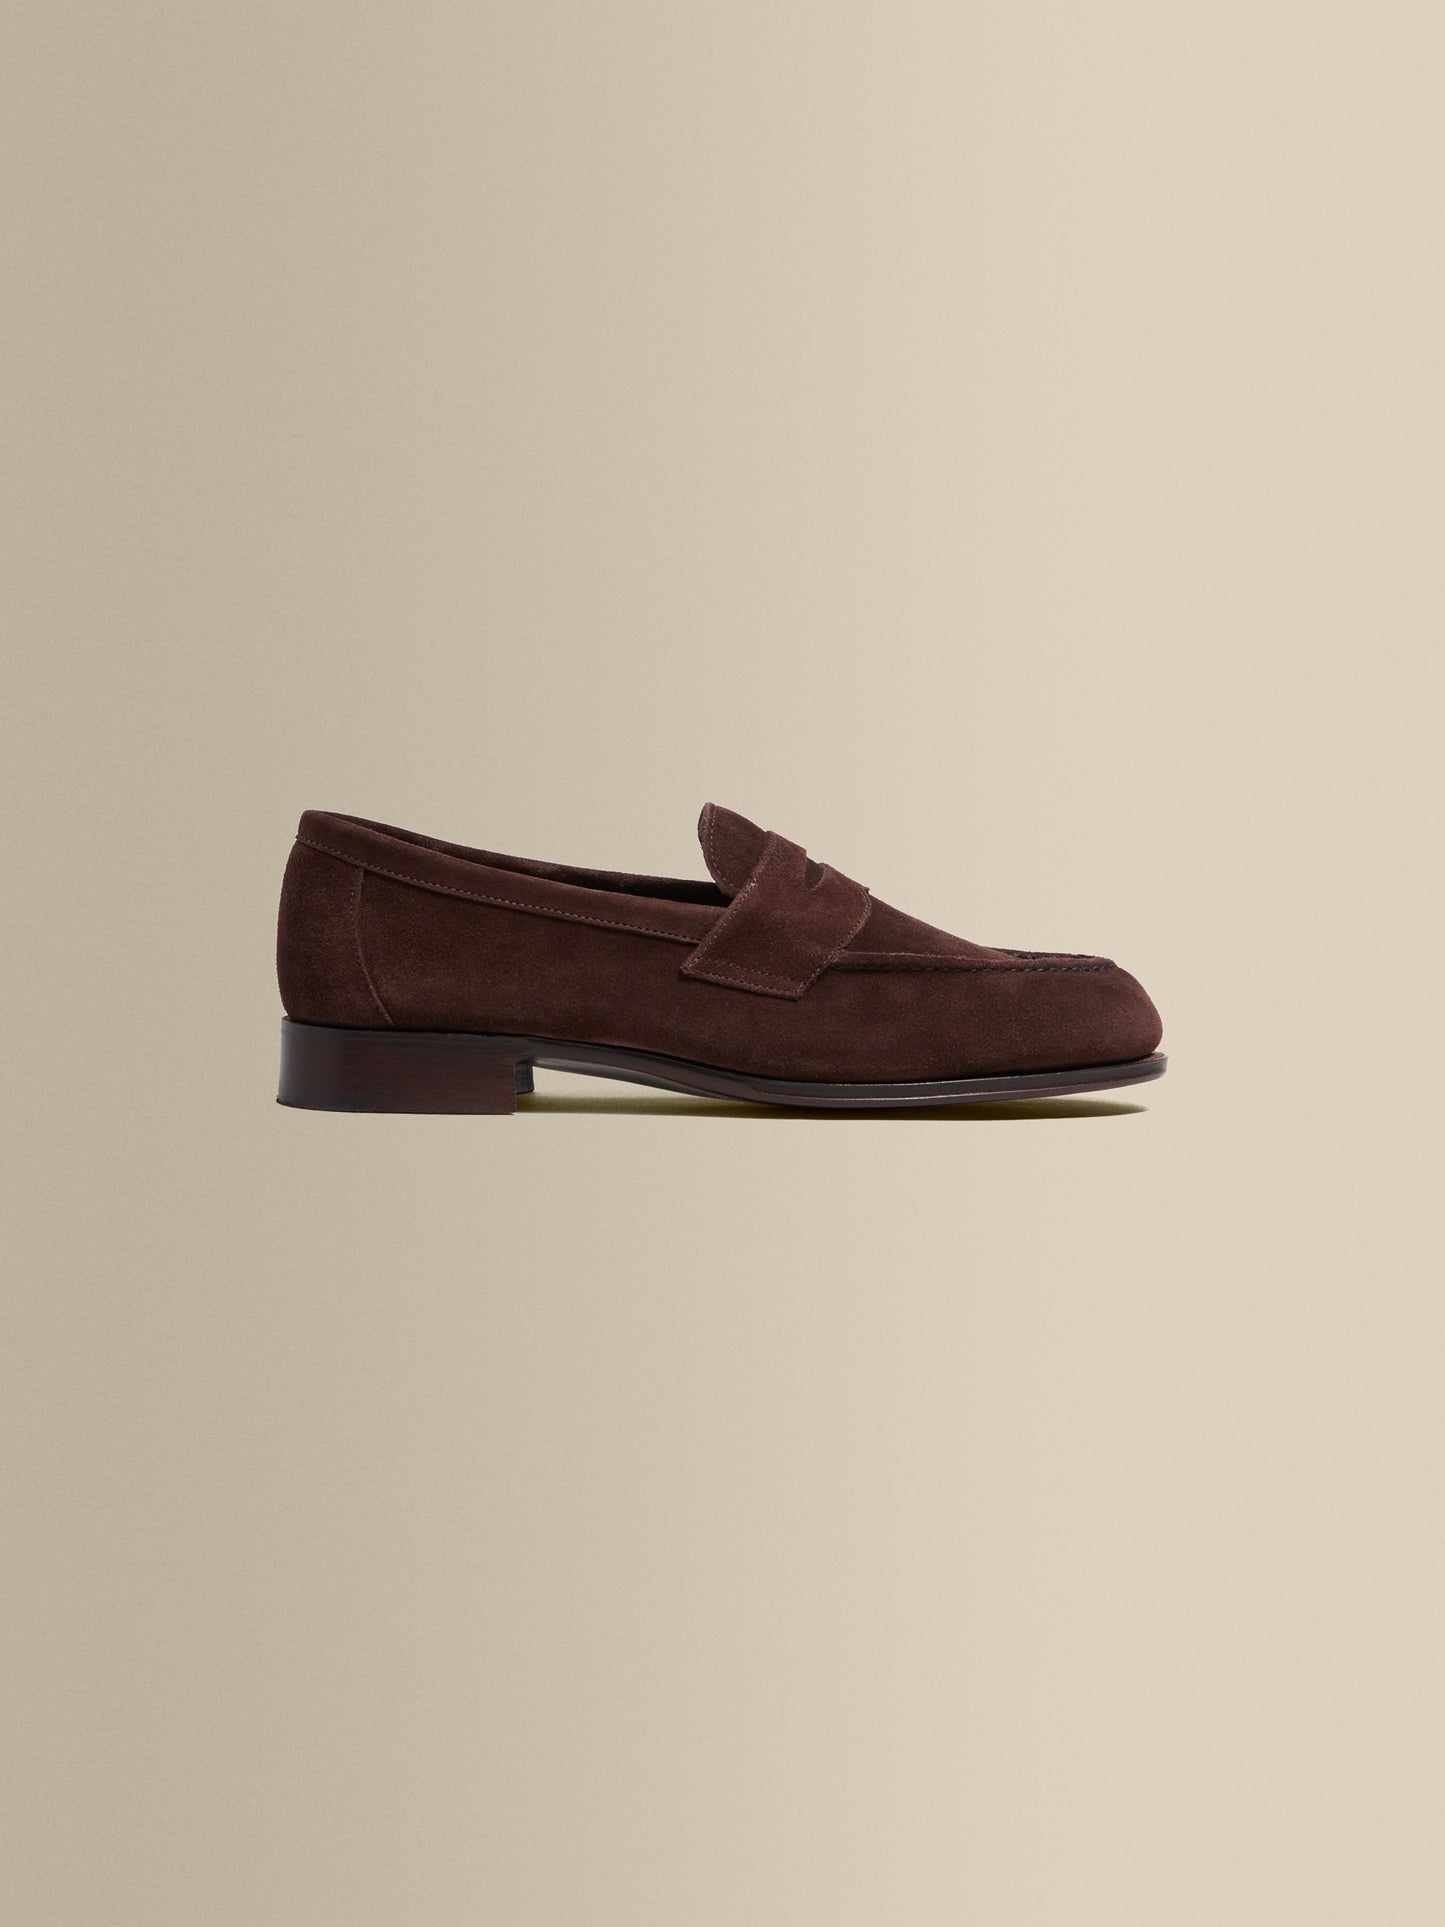 Suede Split Toe Loafer Shoes Coffee Product Image Side